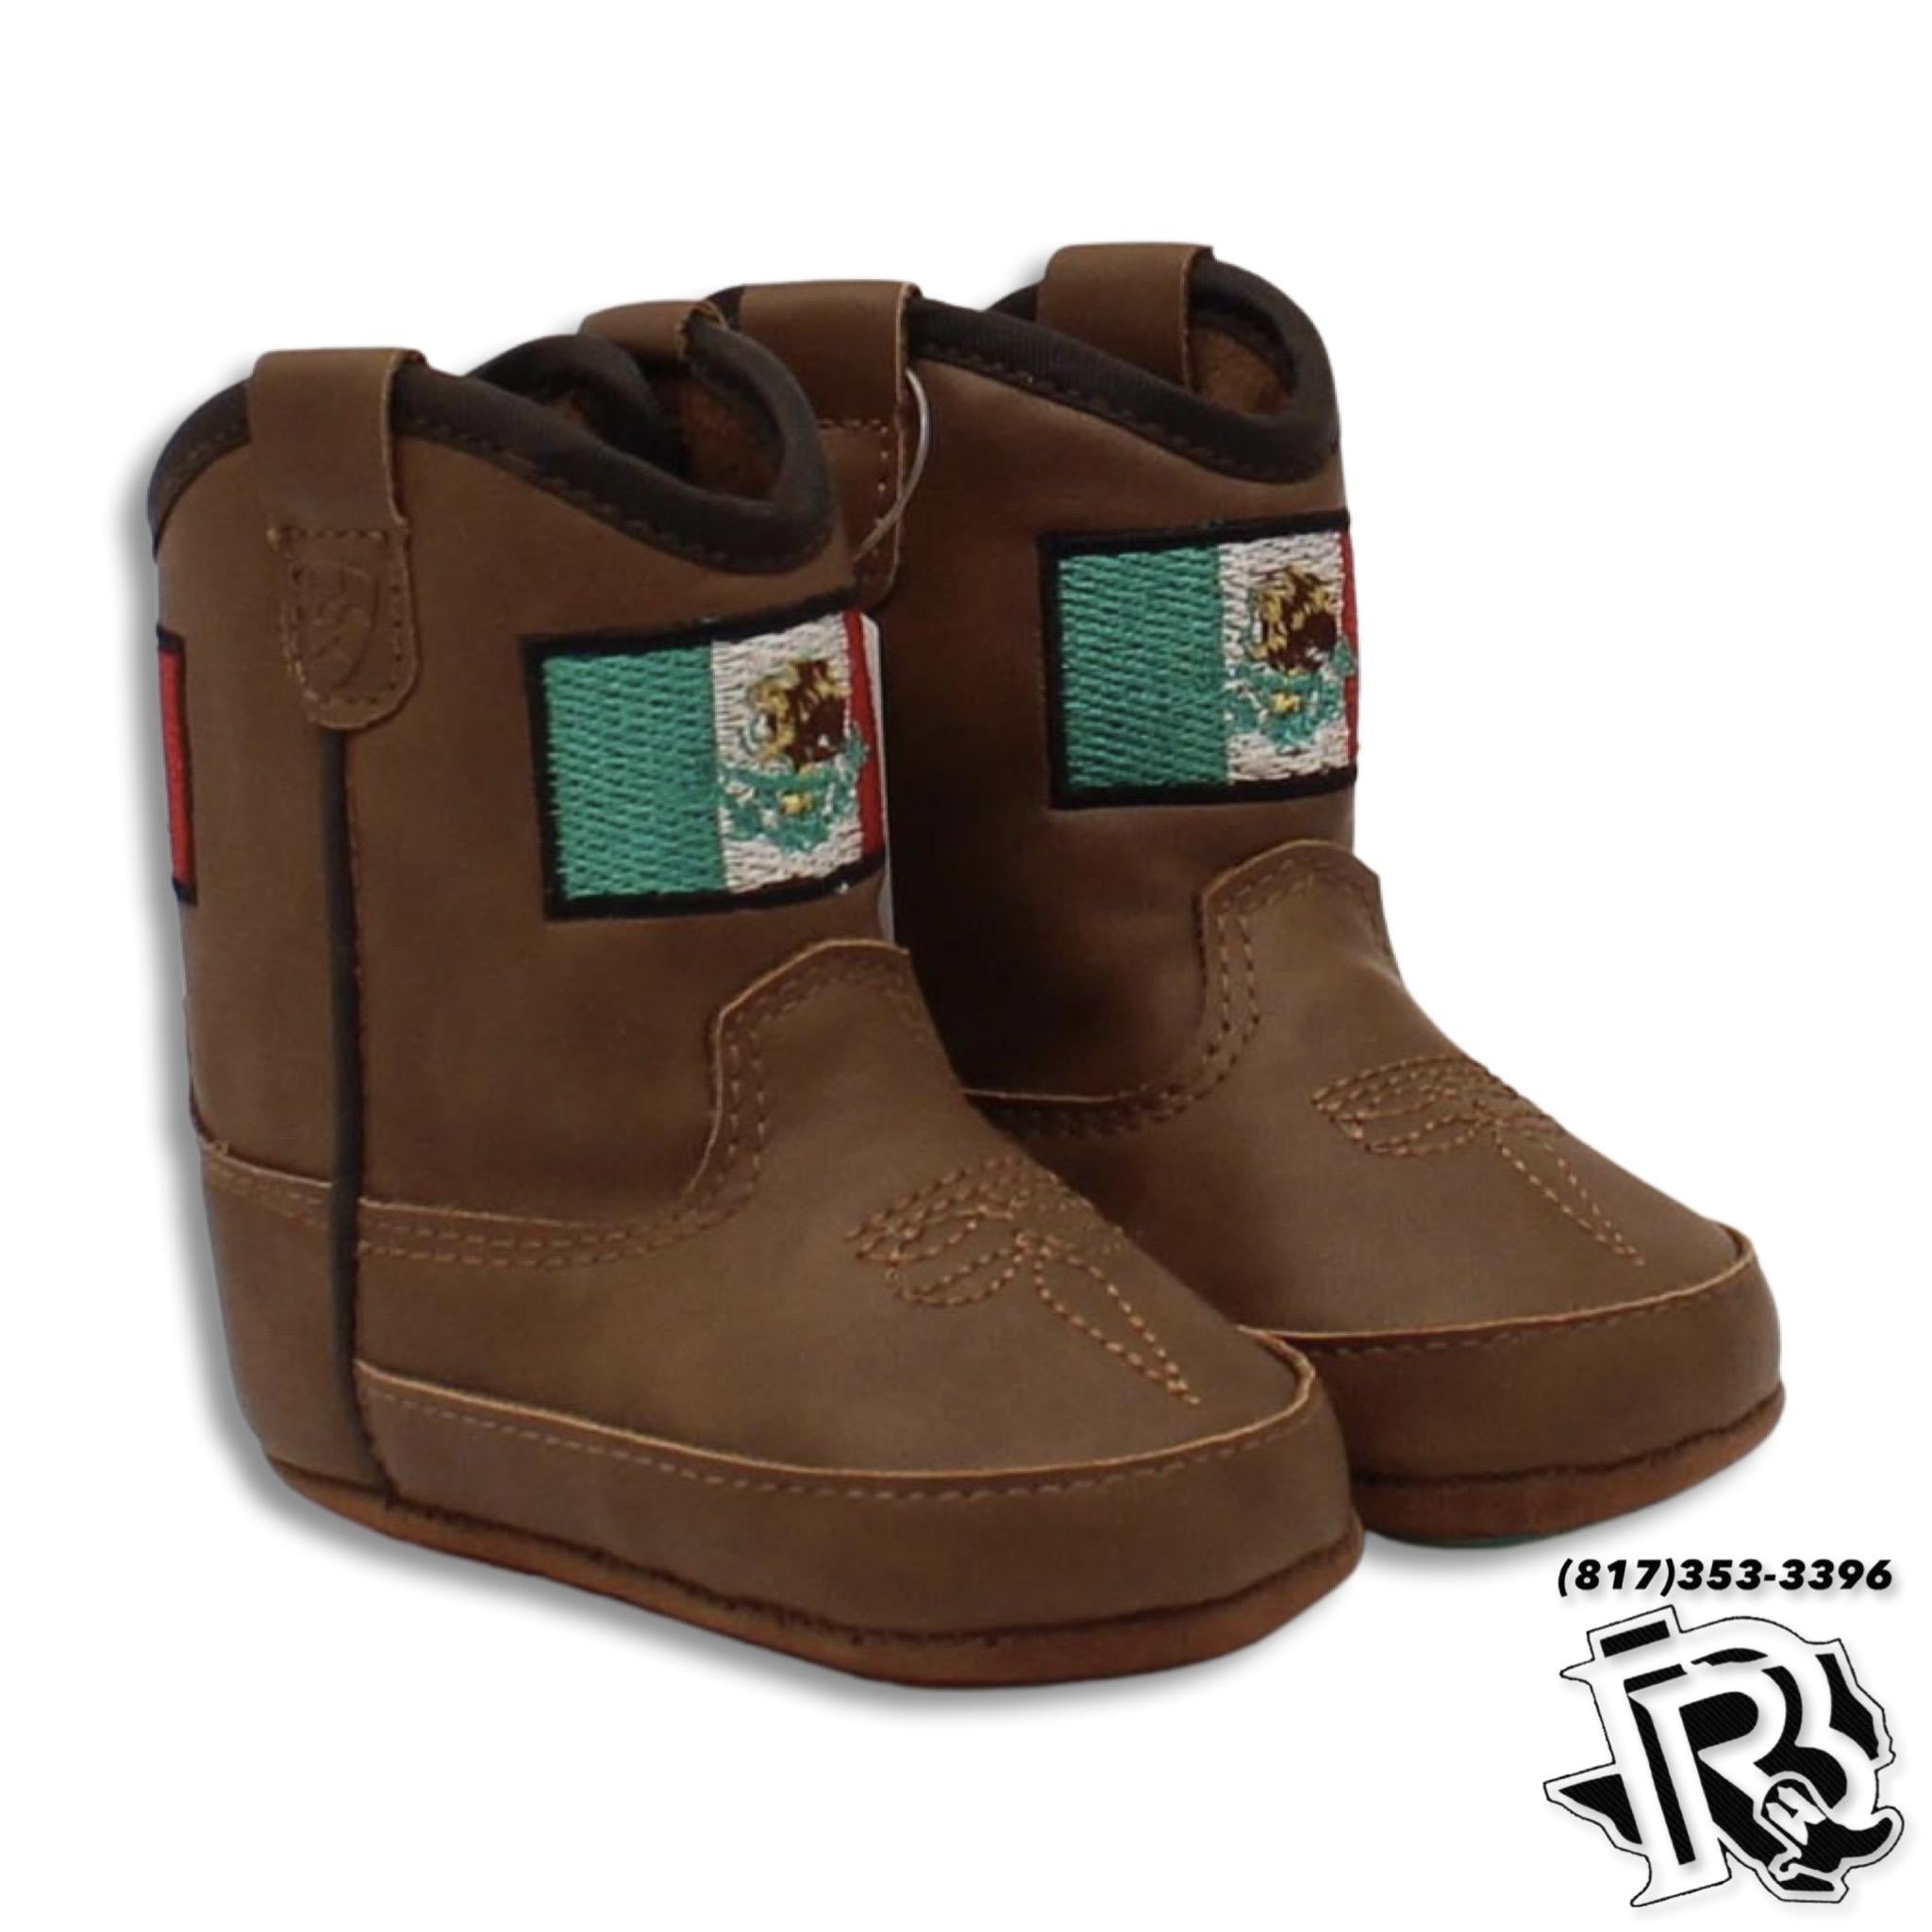 ARIAT SHELBY STYLE LIL’ STOMPERS INFANT BOOT MEXICO FLAG BROWN A442002702